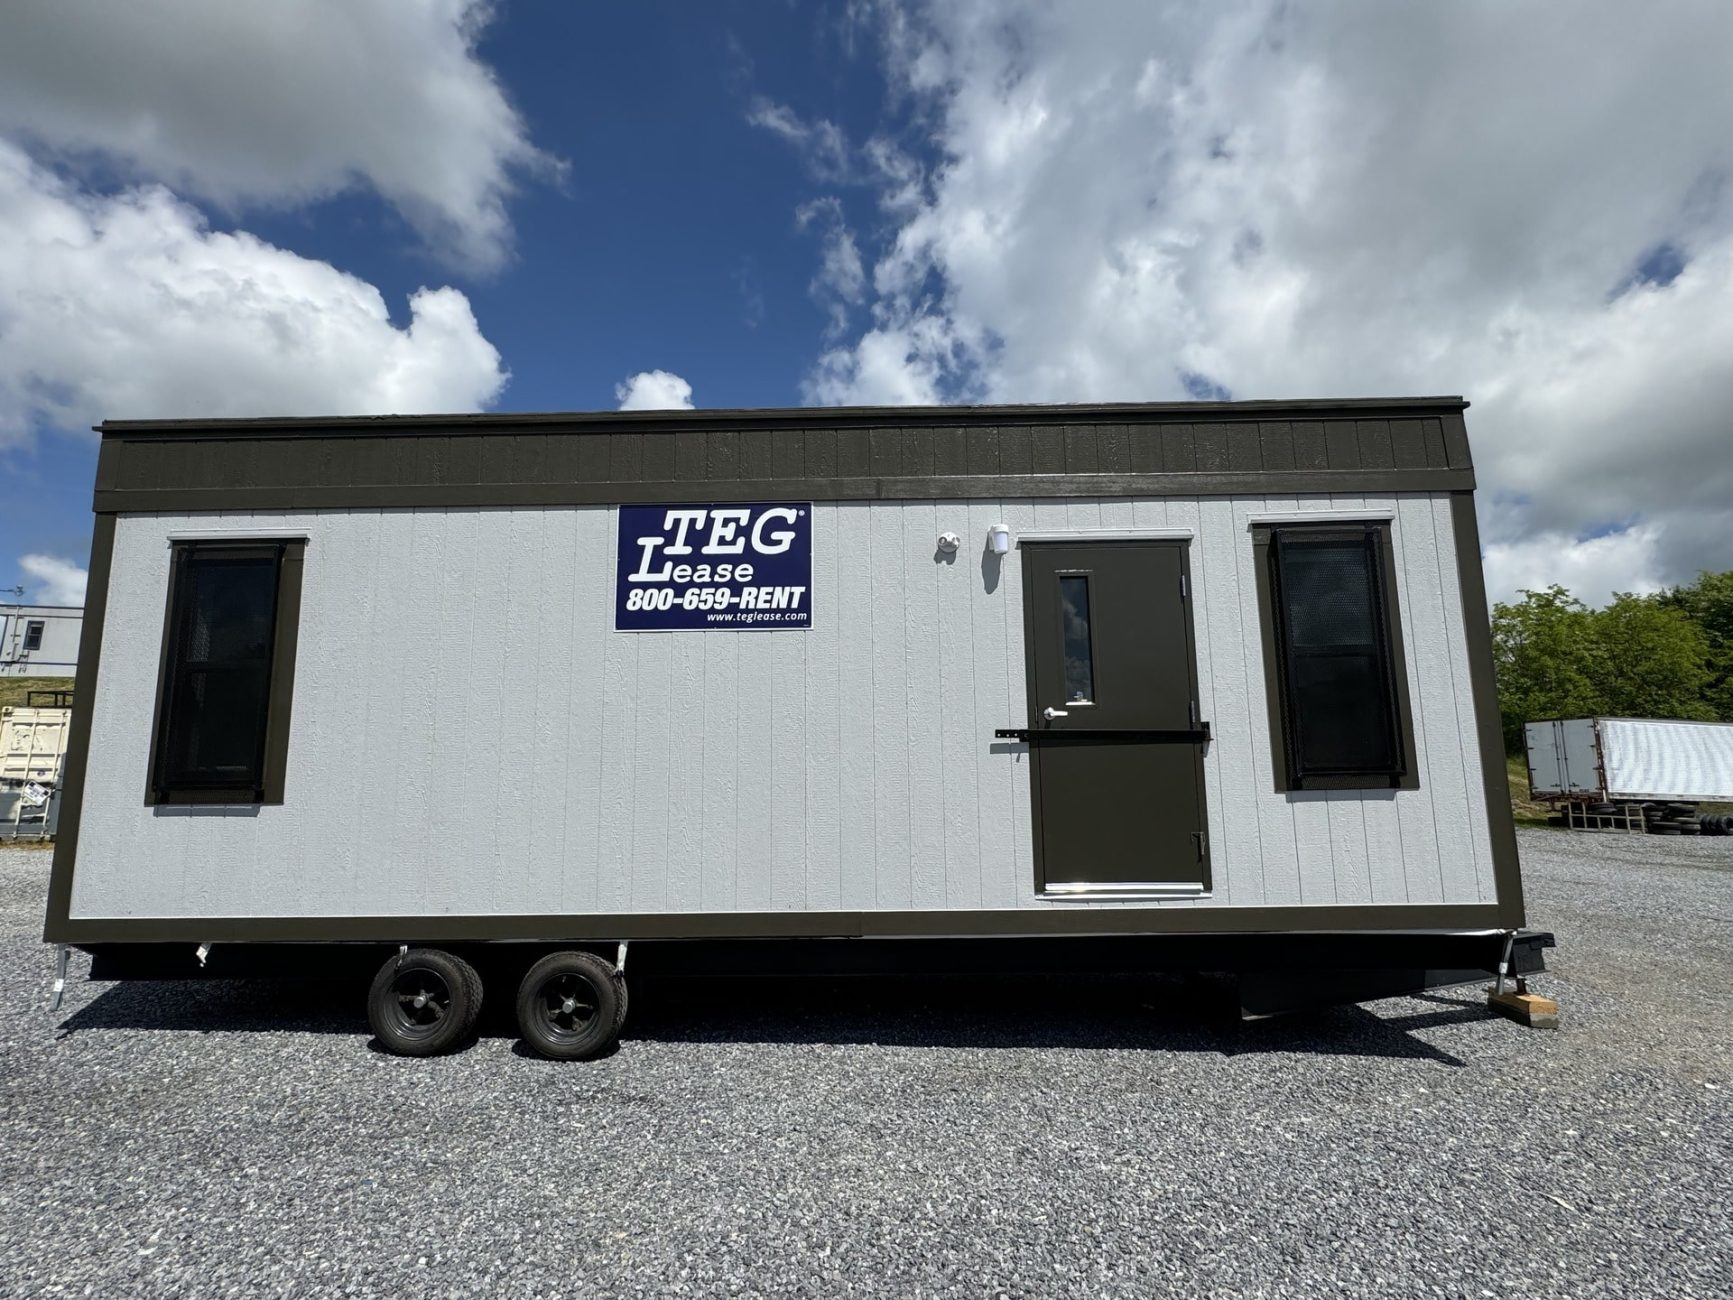 Photo #4 of Field Offices located in Hendersonville, NC